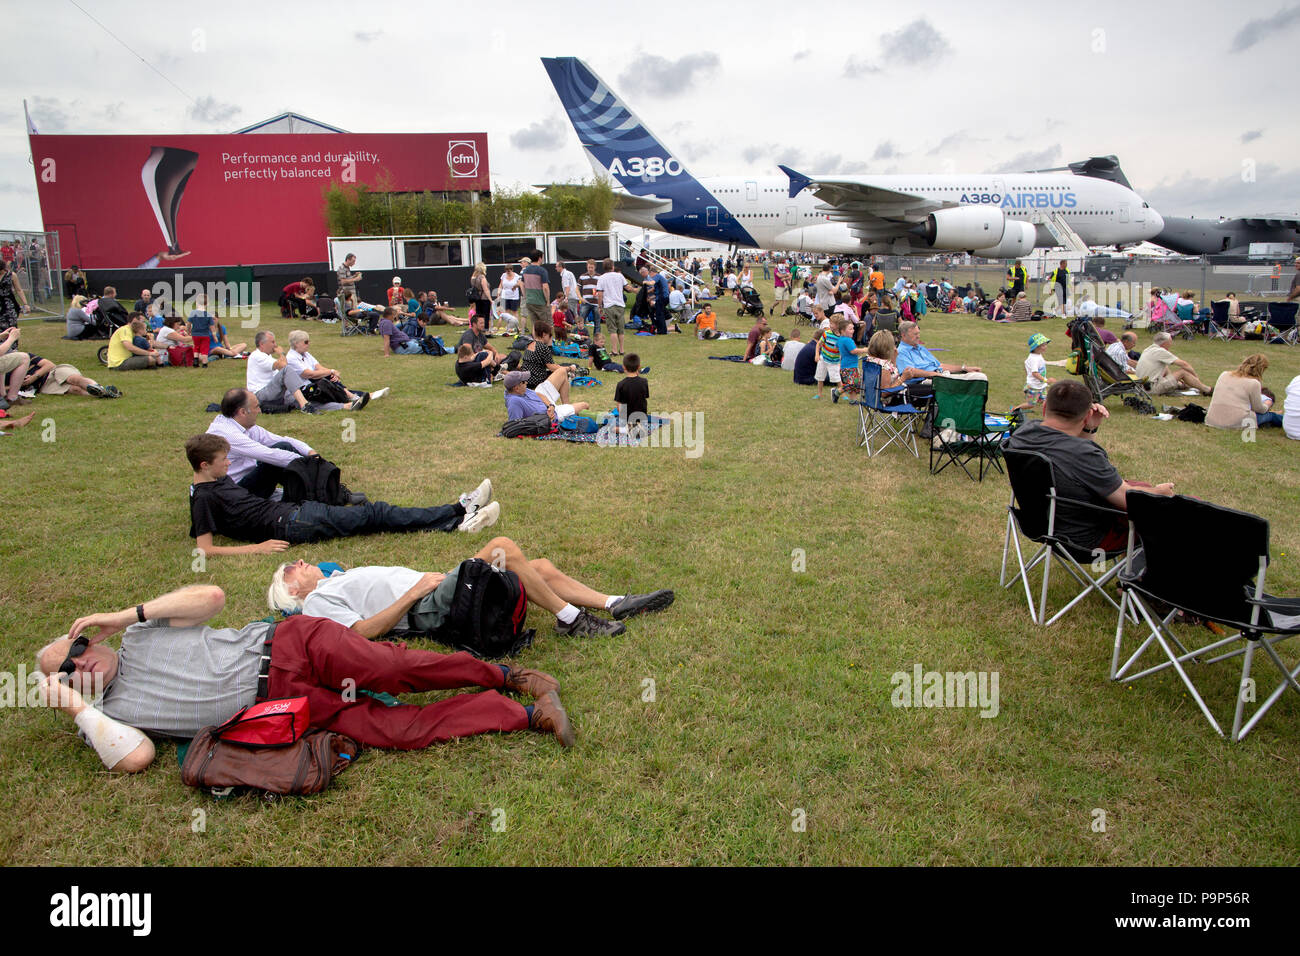 Visitors relax on the grass near Airbus A380 widebody jet airplane during a public day at the Farnborough International Airshow, UK Stock Photo